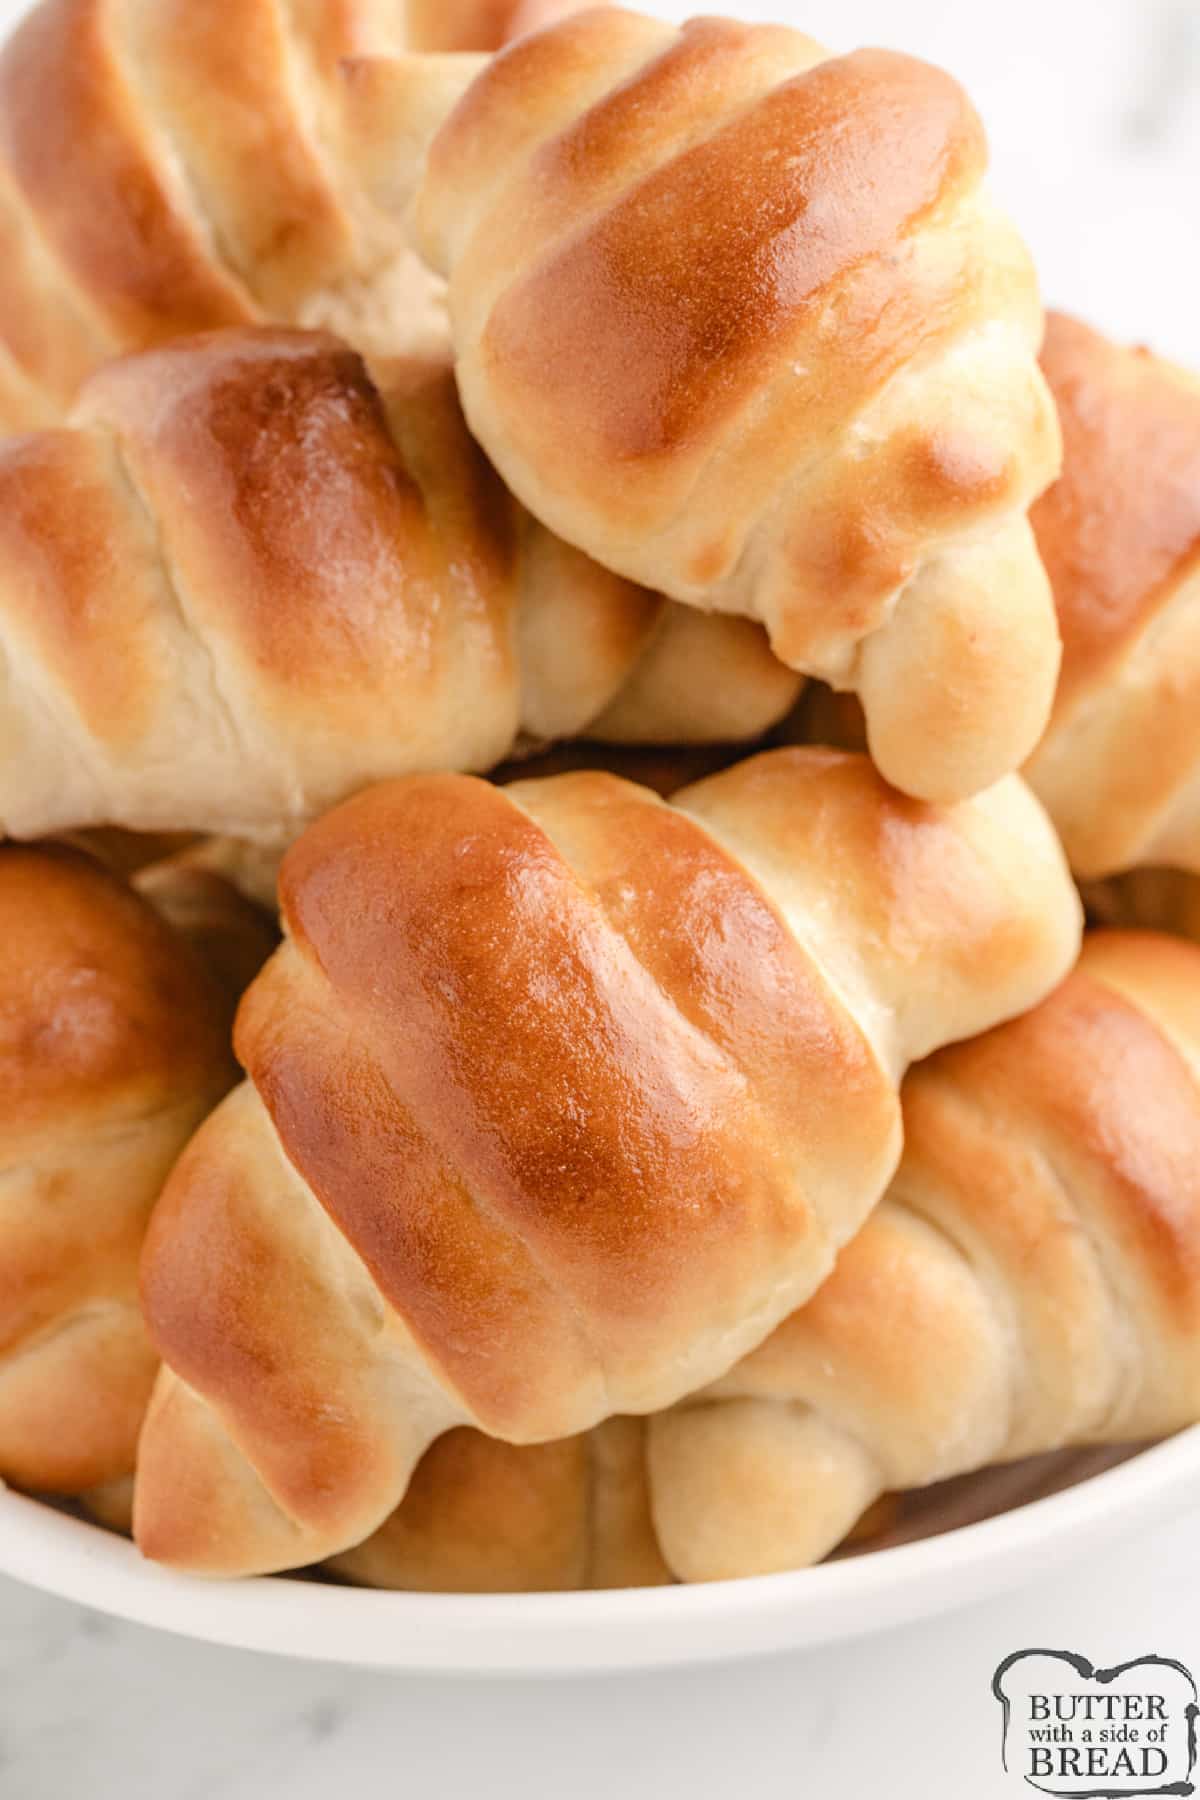 Easy 30-Minute Dinner Rolls are made with a few basic ingredients, you don't need a mixer, and they turn out perfectly soft and delicious every time! The best quick dinner roll recipe I have ever tried!